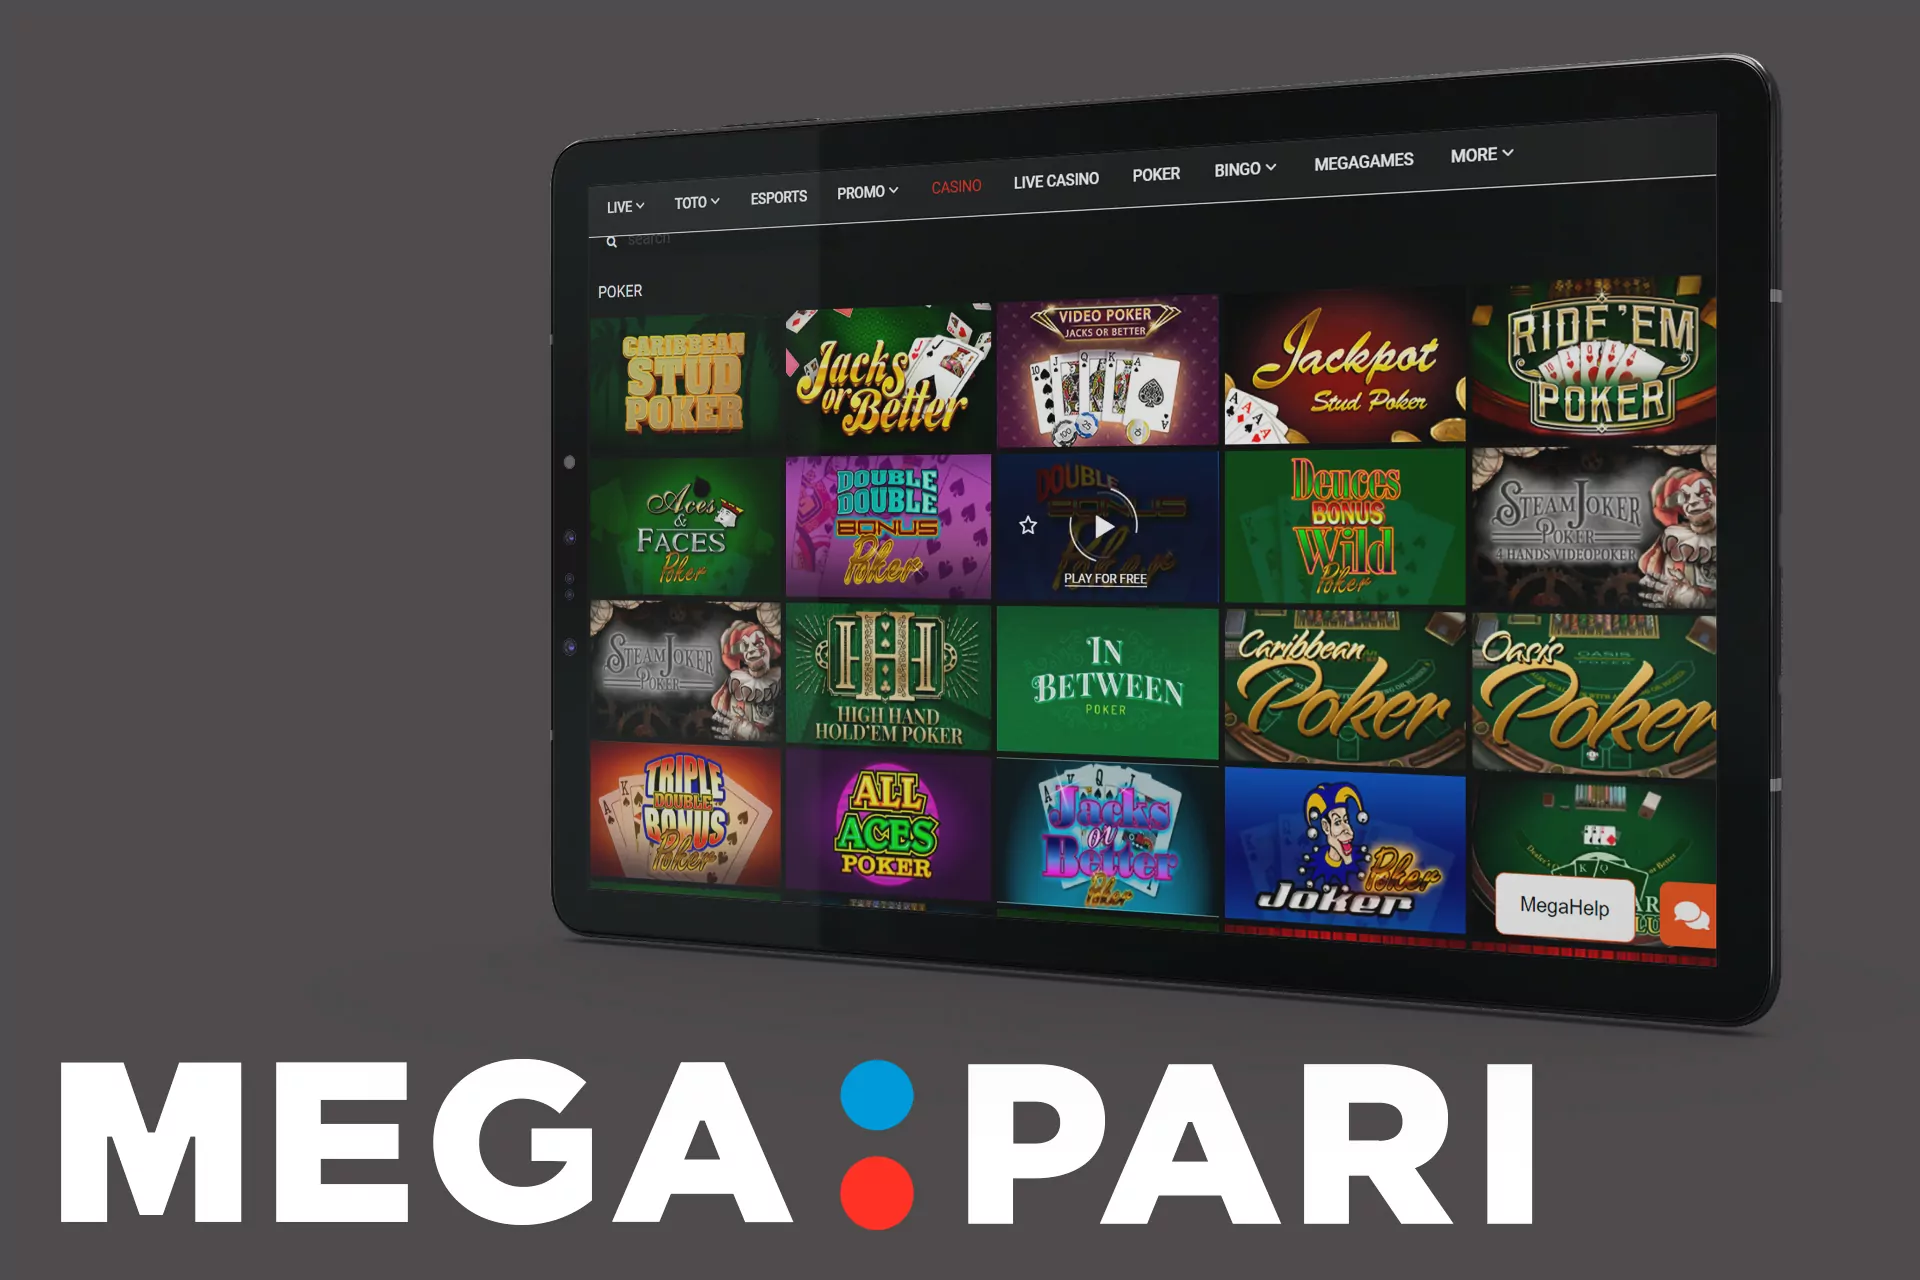 Play poker, baccarat and roulette in the Mega Pari casino.